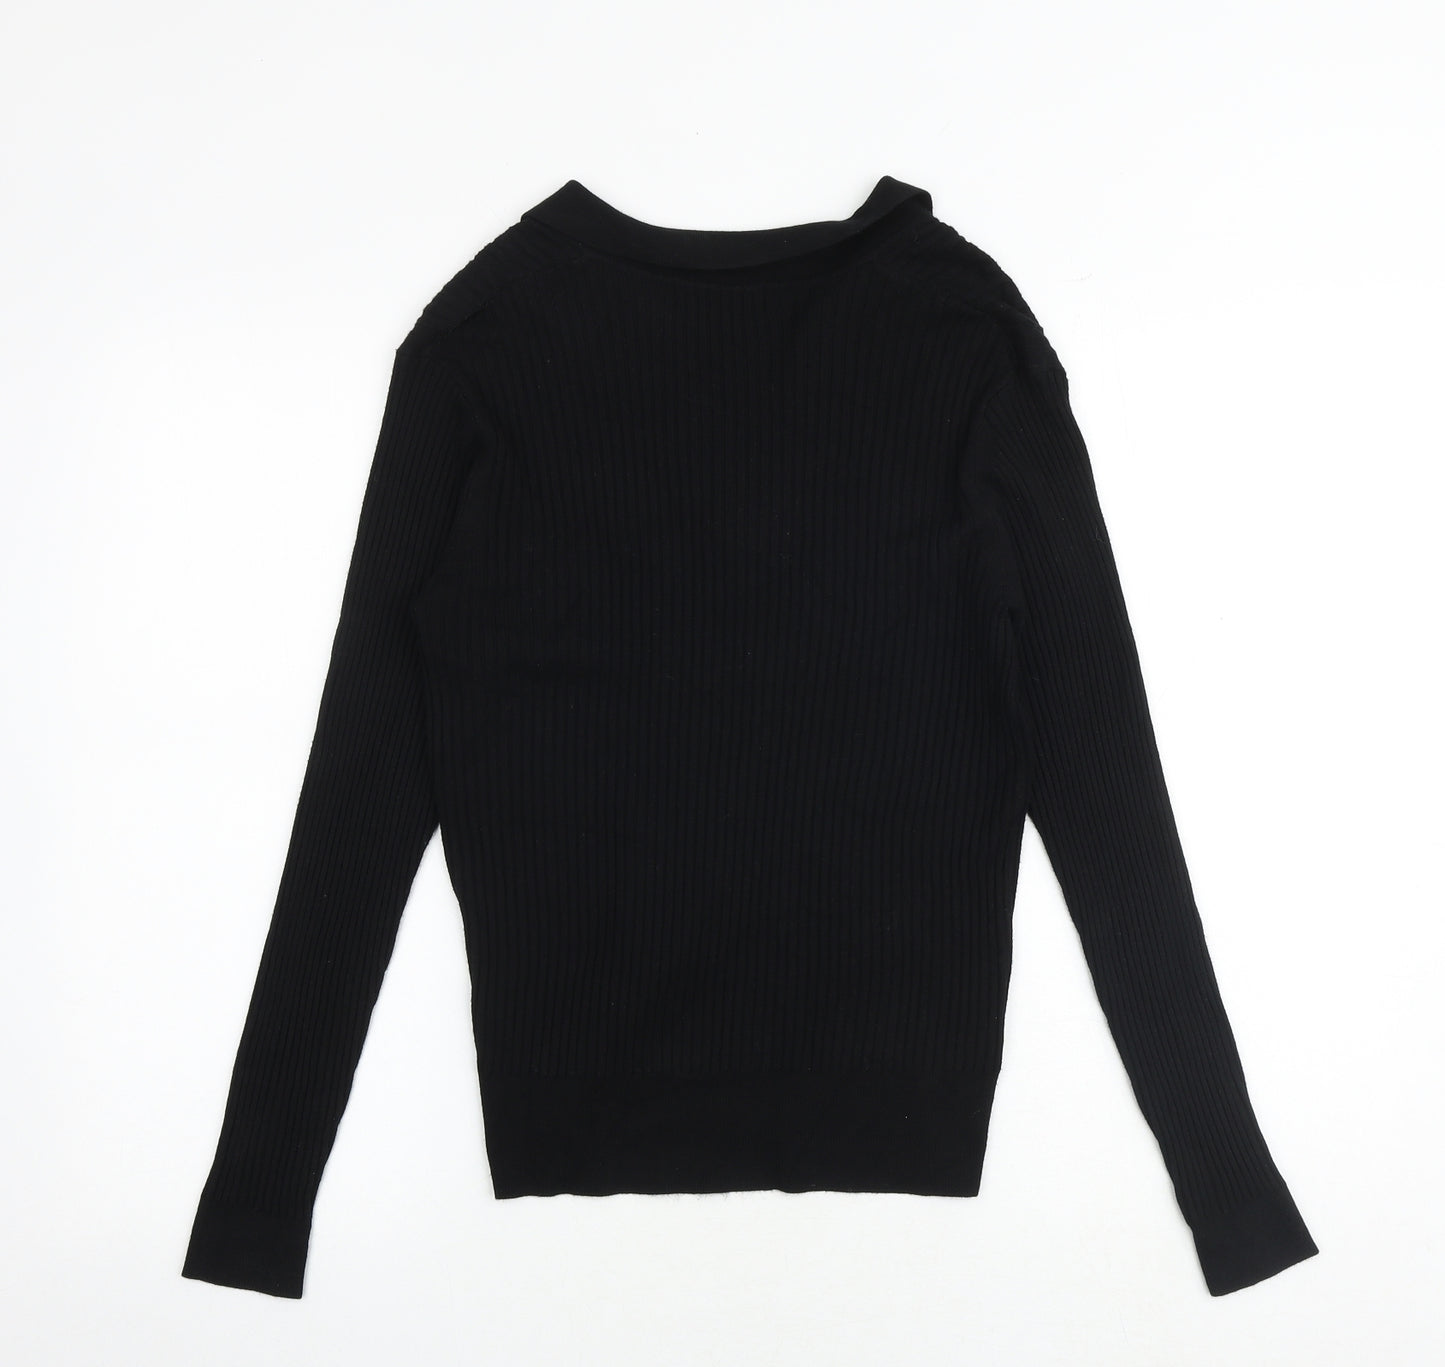 Marks and Spencer Womens Black Collared Viscose Pullover Jumper Size 12